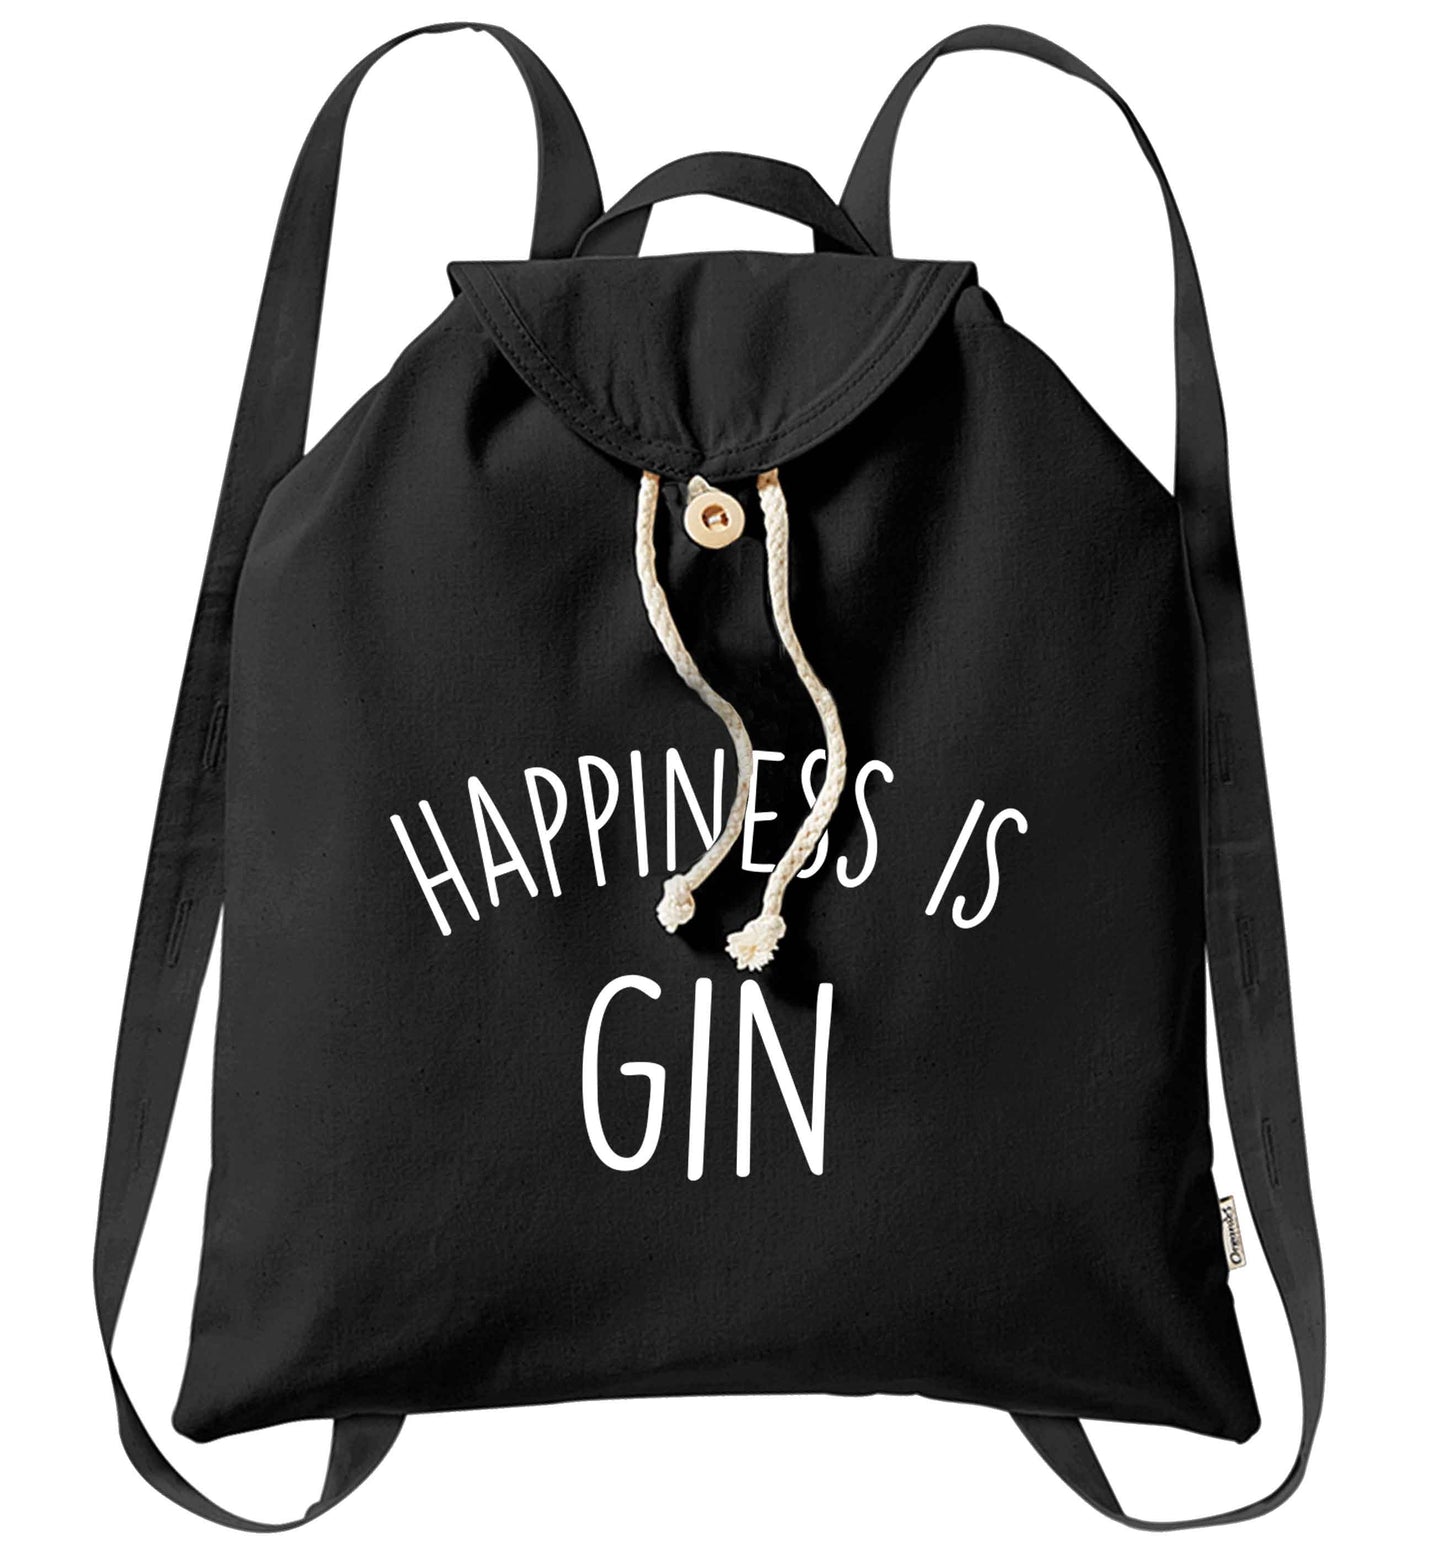 Happiness is gin organic cotton backpack tote with wooden buttons in black